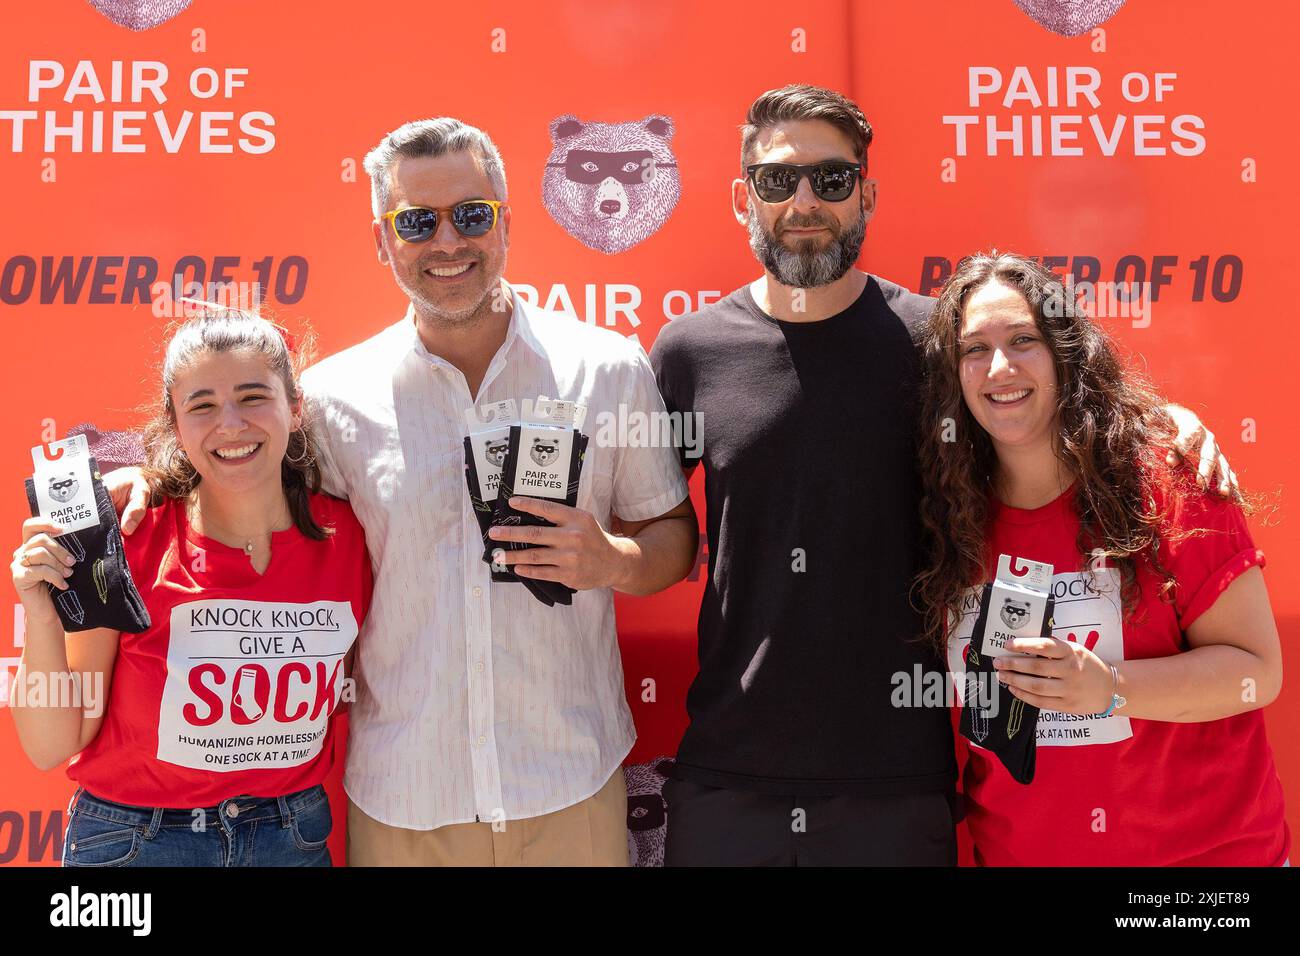 New York, United States. 11th July, 2024. (L- R) Adina Lichtman, Cash Warren, Alan Stuart and Abbi Mayerfeld attend Power of 10 campaign pop-up at North side of Washington Square Park. Pair of Thieves celebrates its 10-year anniversary as it donated 100,000 pairs of socks in partnership with 10 organizations across the country to support underserved groups and minorities. Company uses Swass-Free technology to produce their products. (Photo by Lev Radin/Pacific Press) Credit: Pacific Press Media Production Corp./Alamy Live News Stock Photo